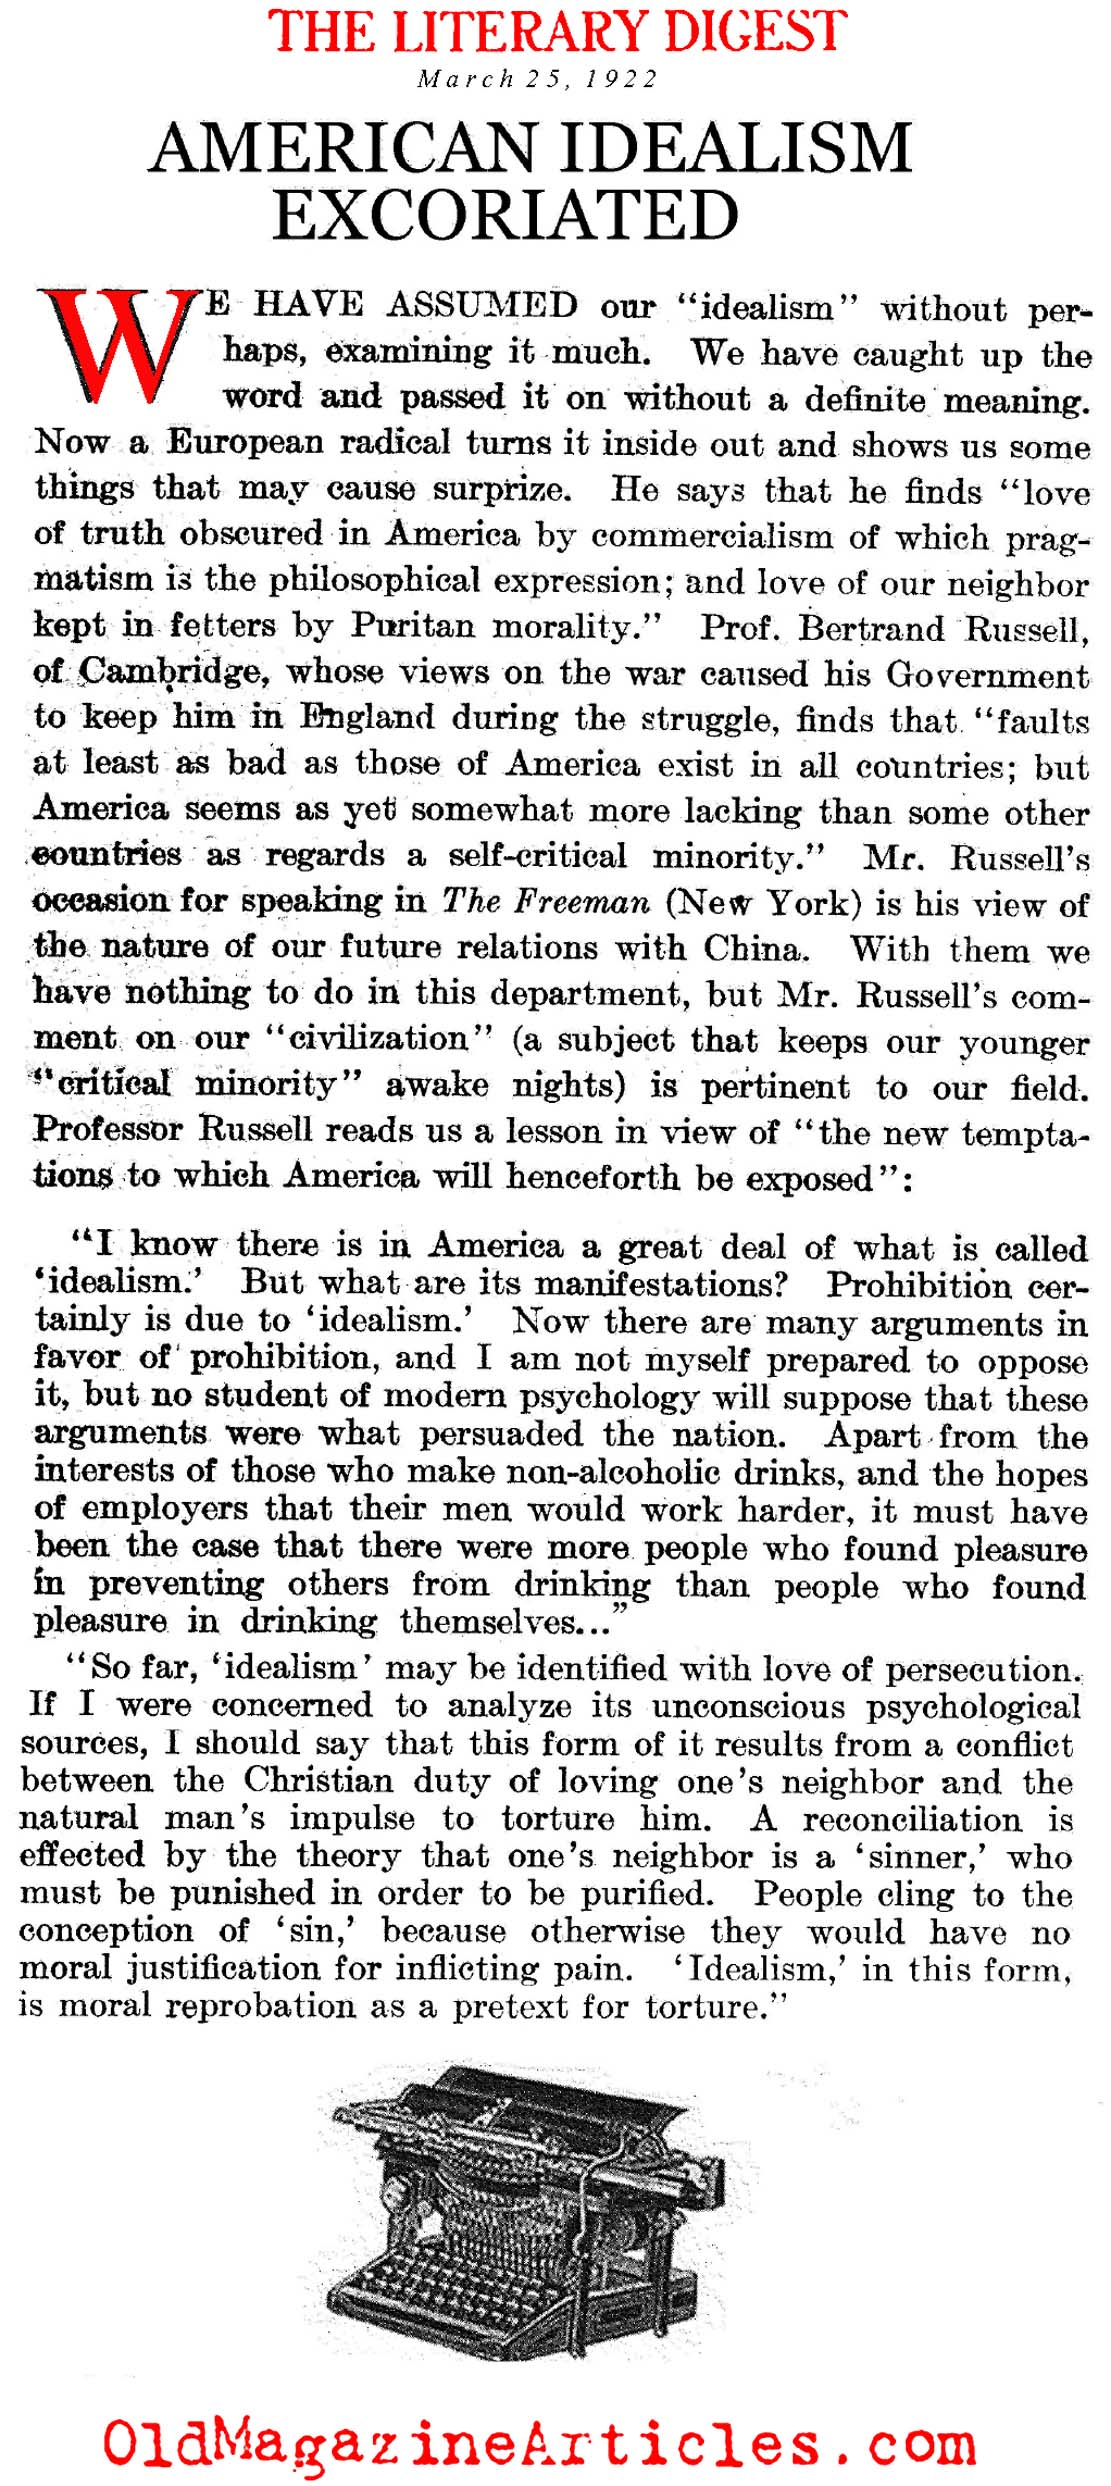 Prohibition:  A Product of American Idealism (Literary Digest, 1922)